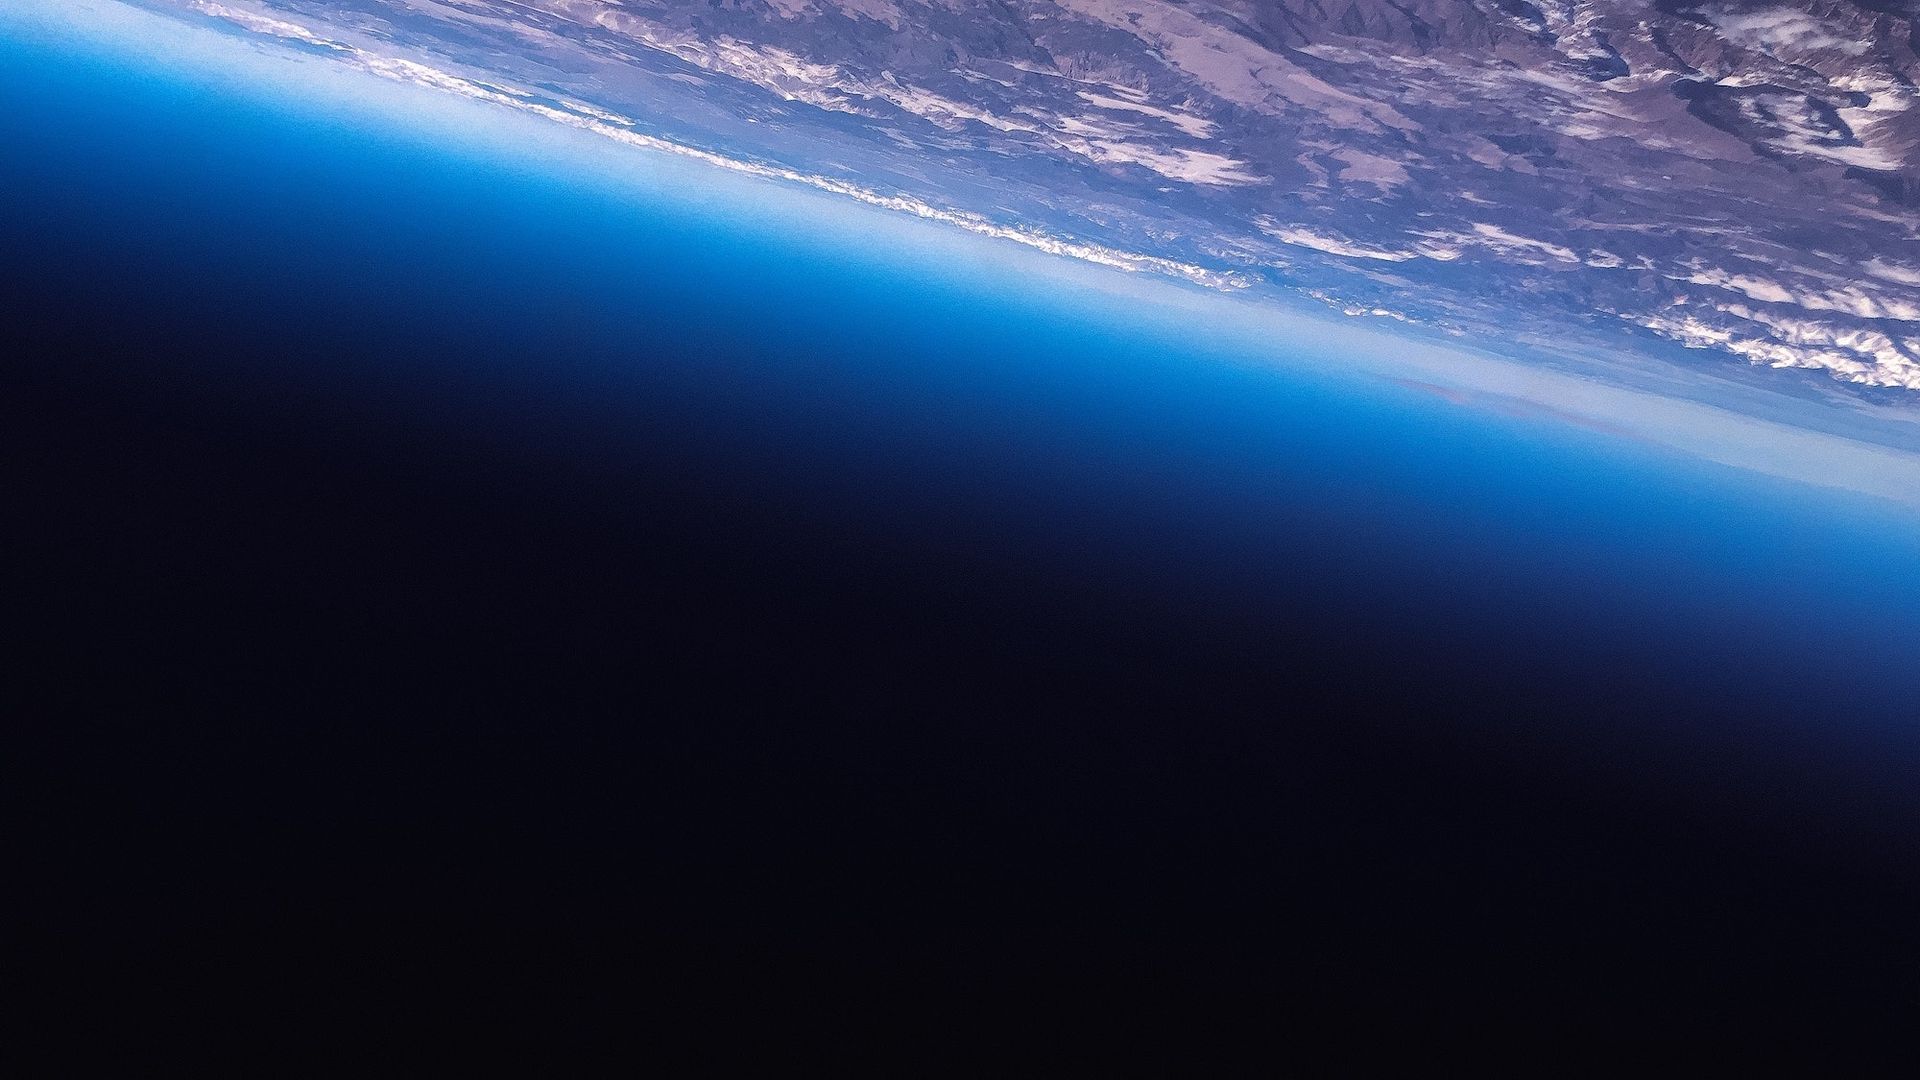 View of the earth from space